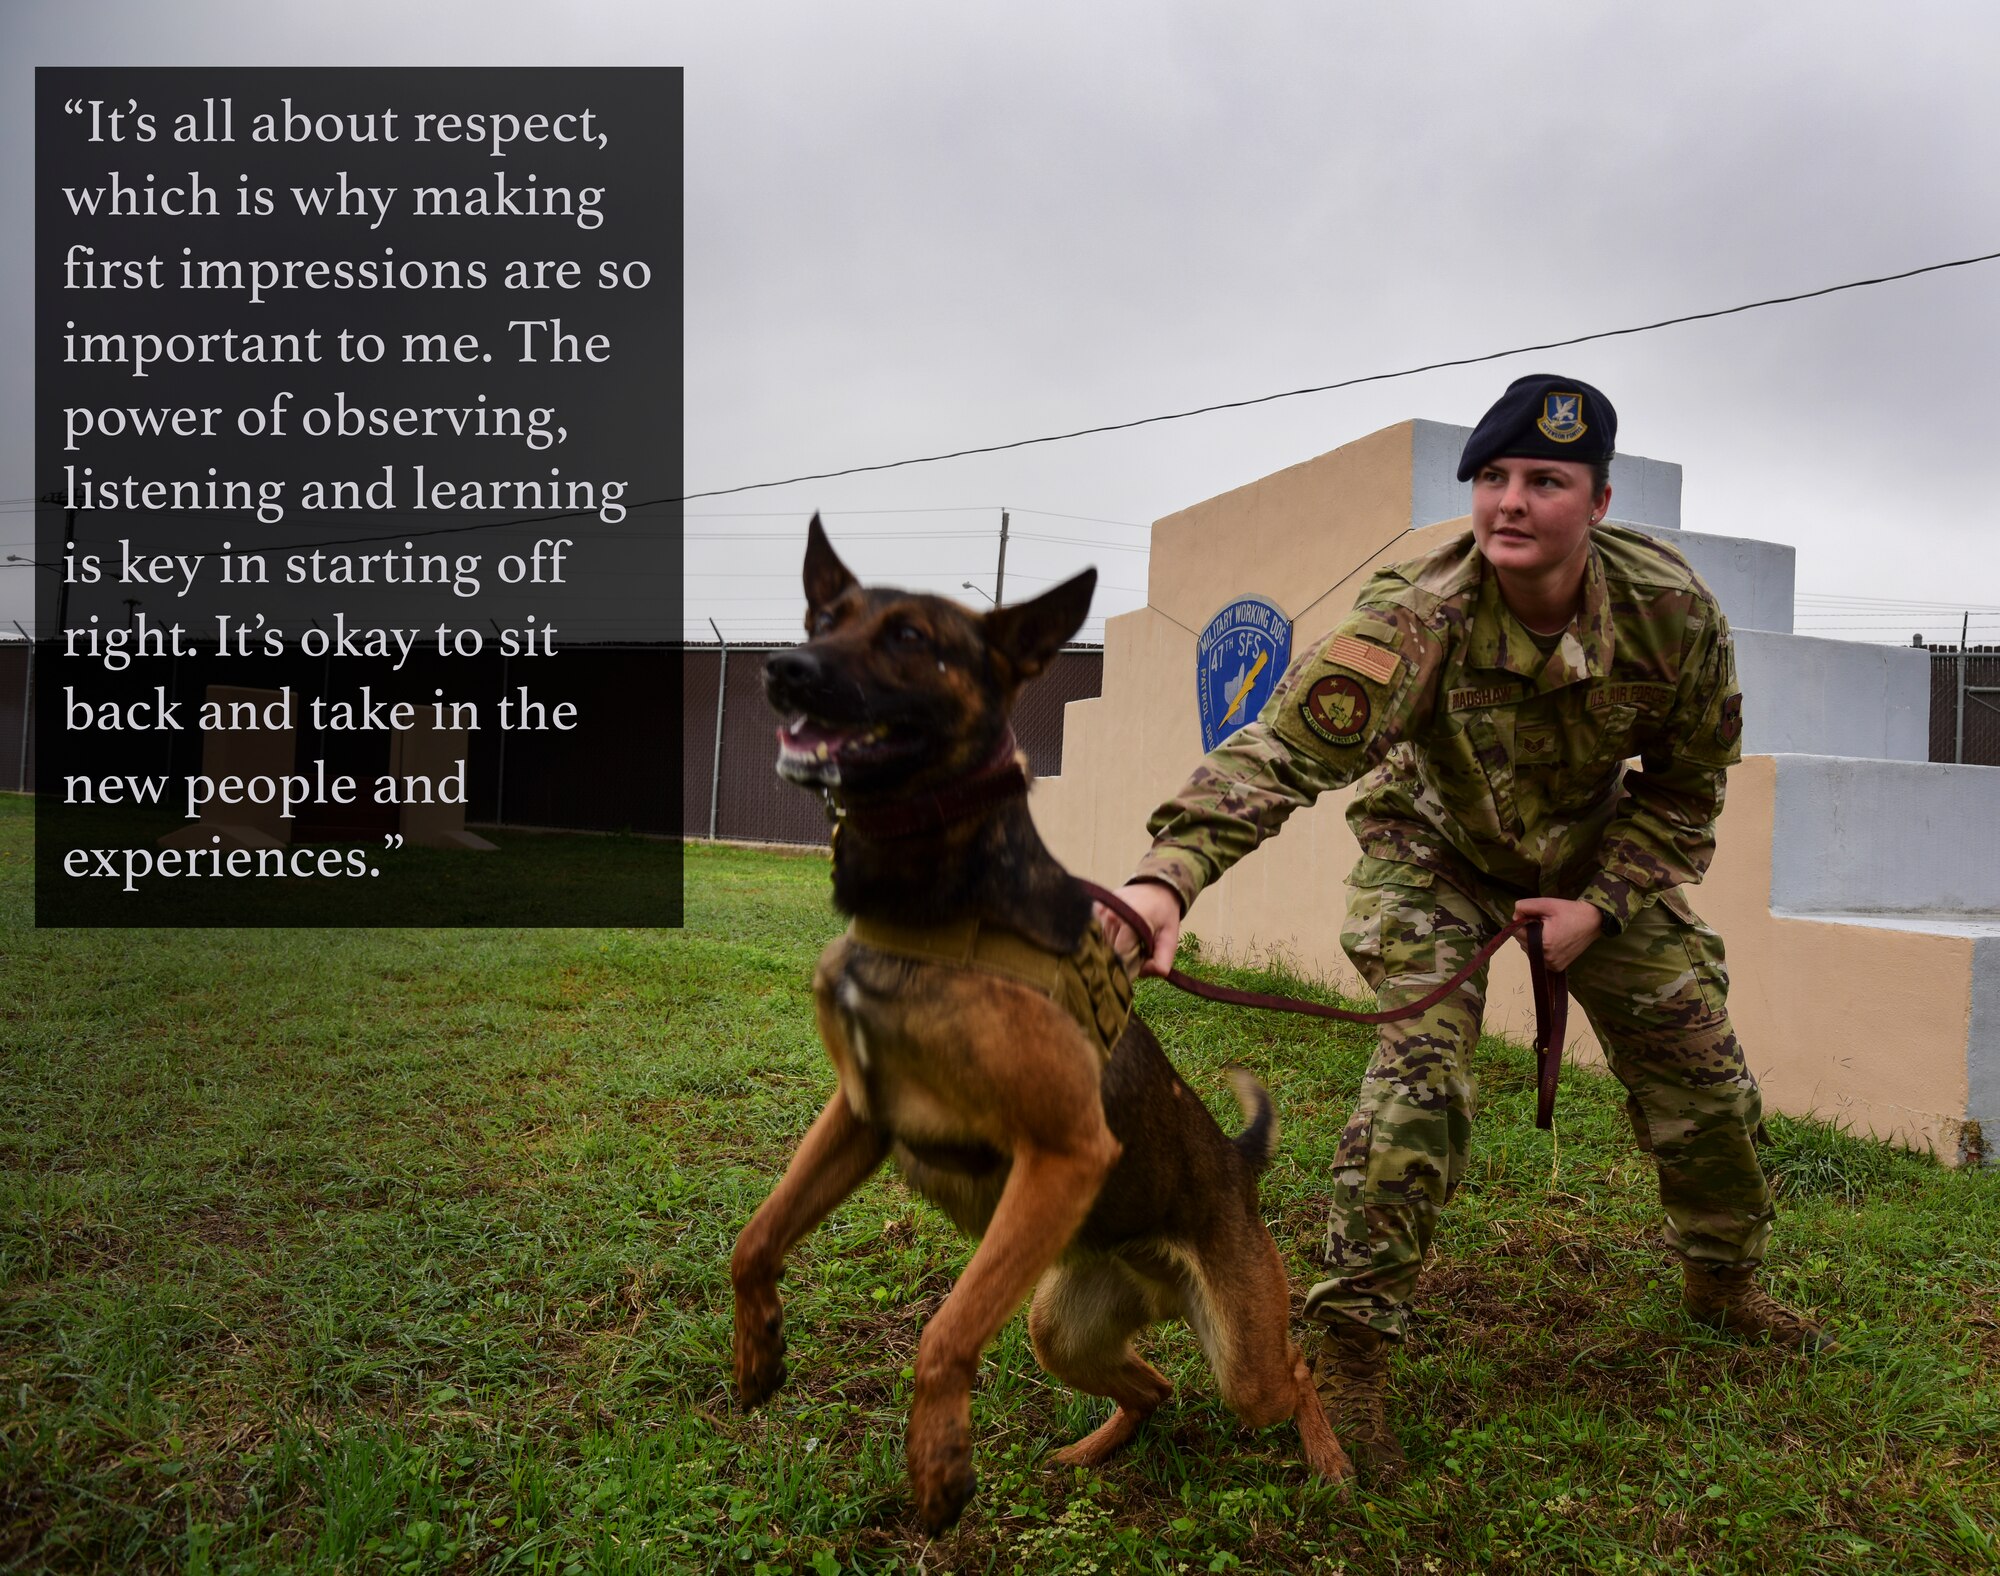 Staff Sgt. Vicktoria Bradshaw, 47th Security Forces Squadron military working dog handler, is relatively new to the K-9 career field and to Laughlin Air Force base, Texas. Bradshaw is empowered by absorbing information and experience. She emphasizes the importance of giving and expecting respect, which is why she believes it’s valuable to listen and observe more than anything. (U.S. Air Force graphic by Senior Airman Anne McCready)